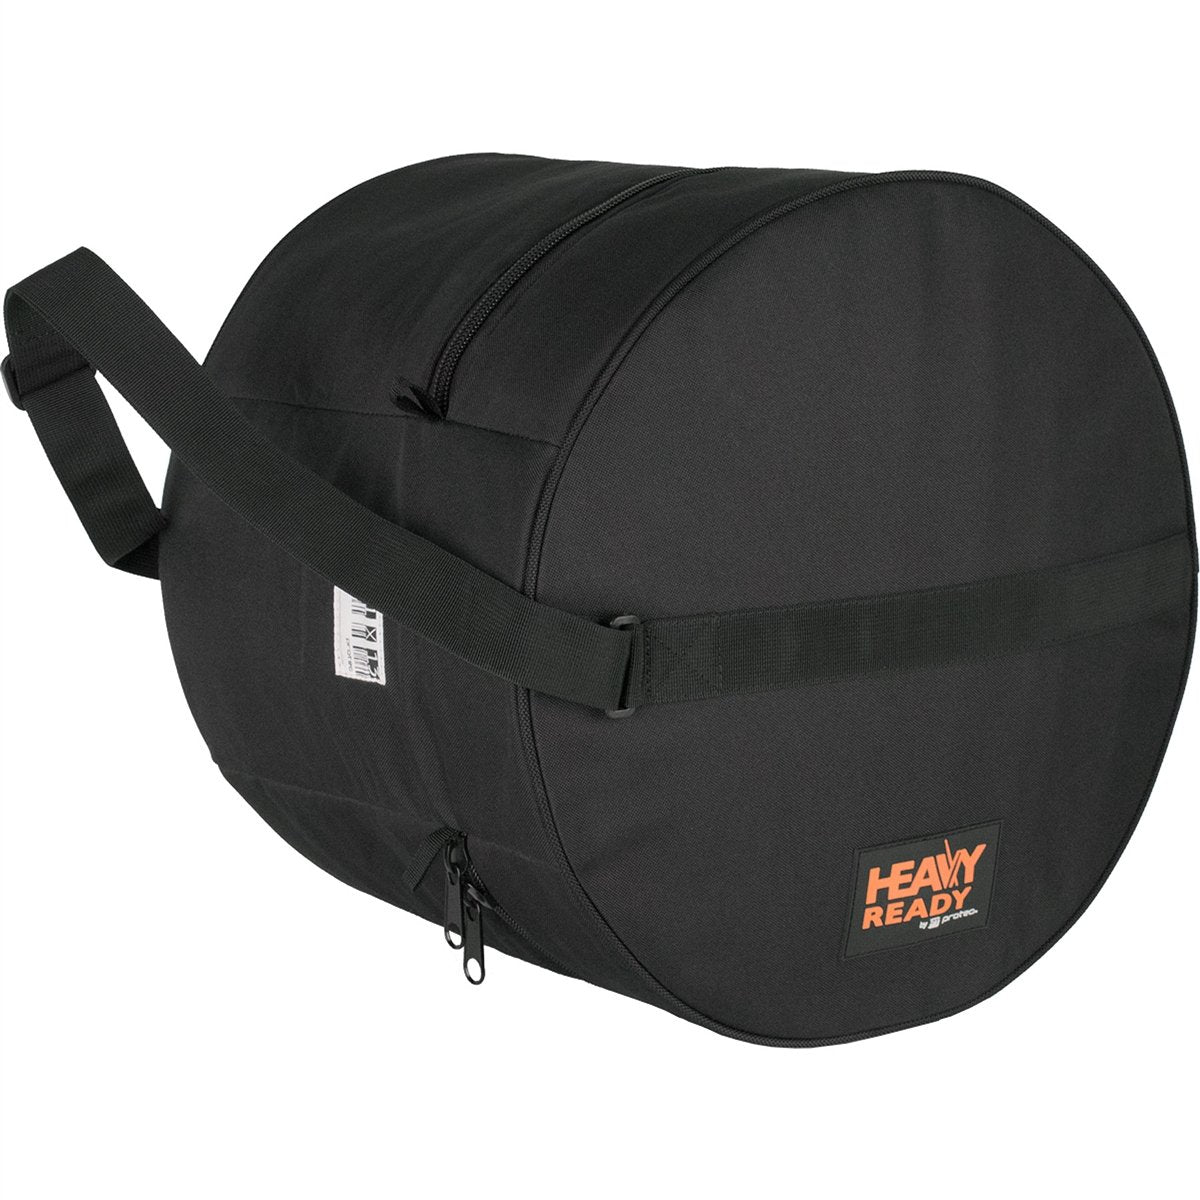 Protec - Padded Tom Bag 11â€³ X 13â€³ (Heavy Ready Series)-Percussion-Protec-Music Elements